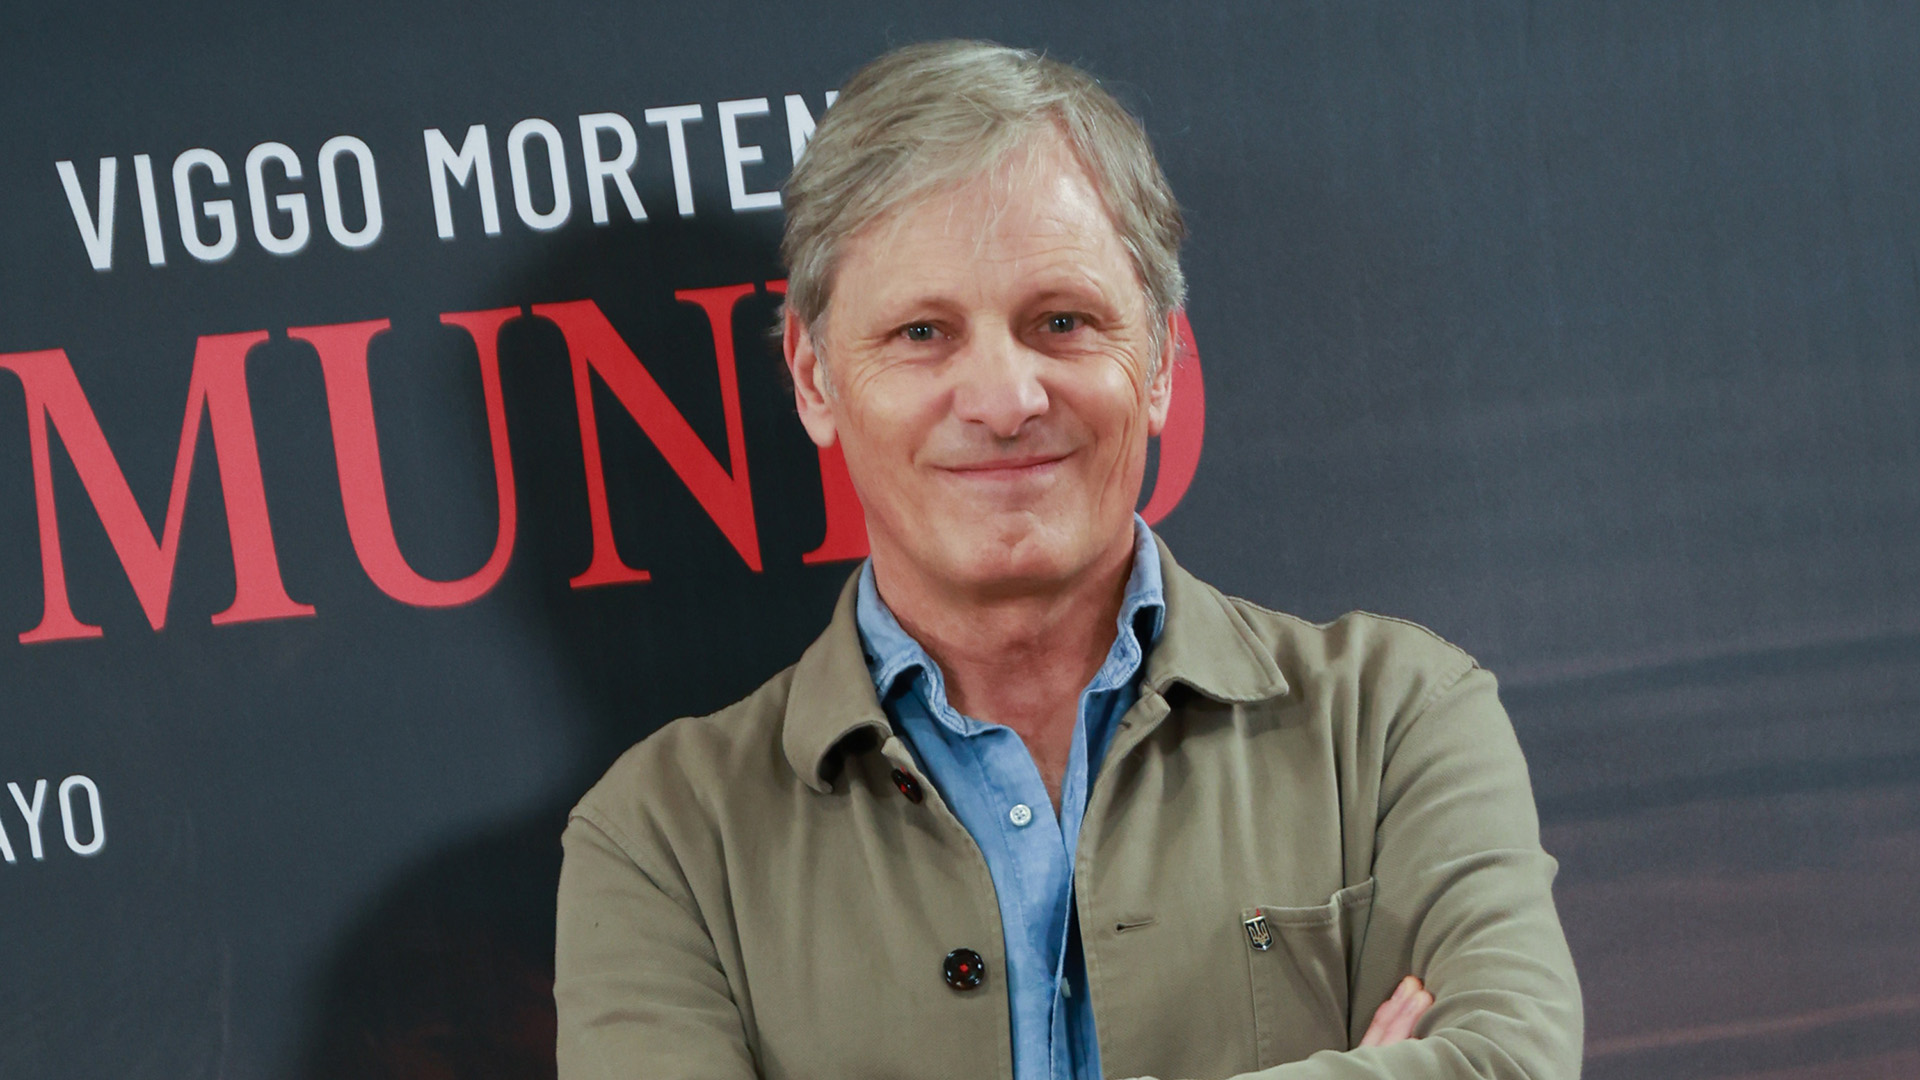 MADRID, SPAIN - MAY 08: Viggo Mortensen attends the Madrid photocall for "Hasta El Fin Del Mundo" at Hotel URSO on May 08, 2024 in Madrid, Spain. (Photo by Patricia J. Garcinuno/WireImage)